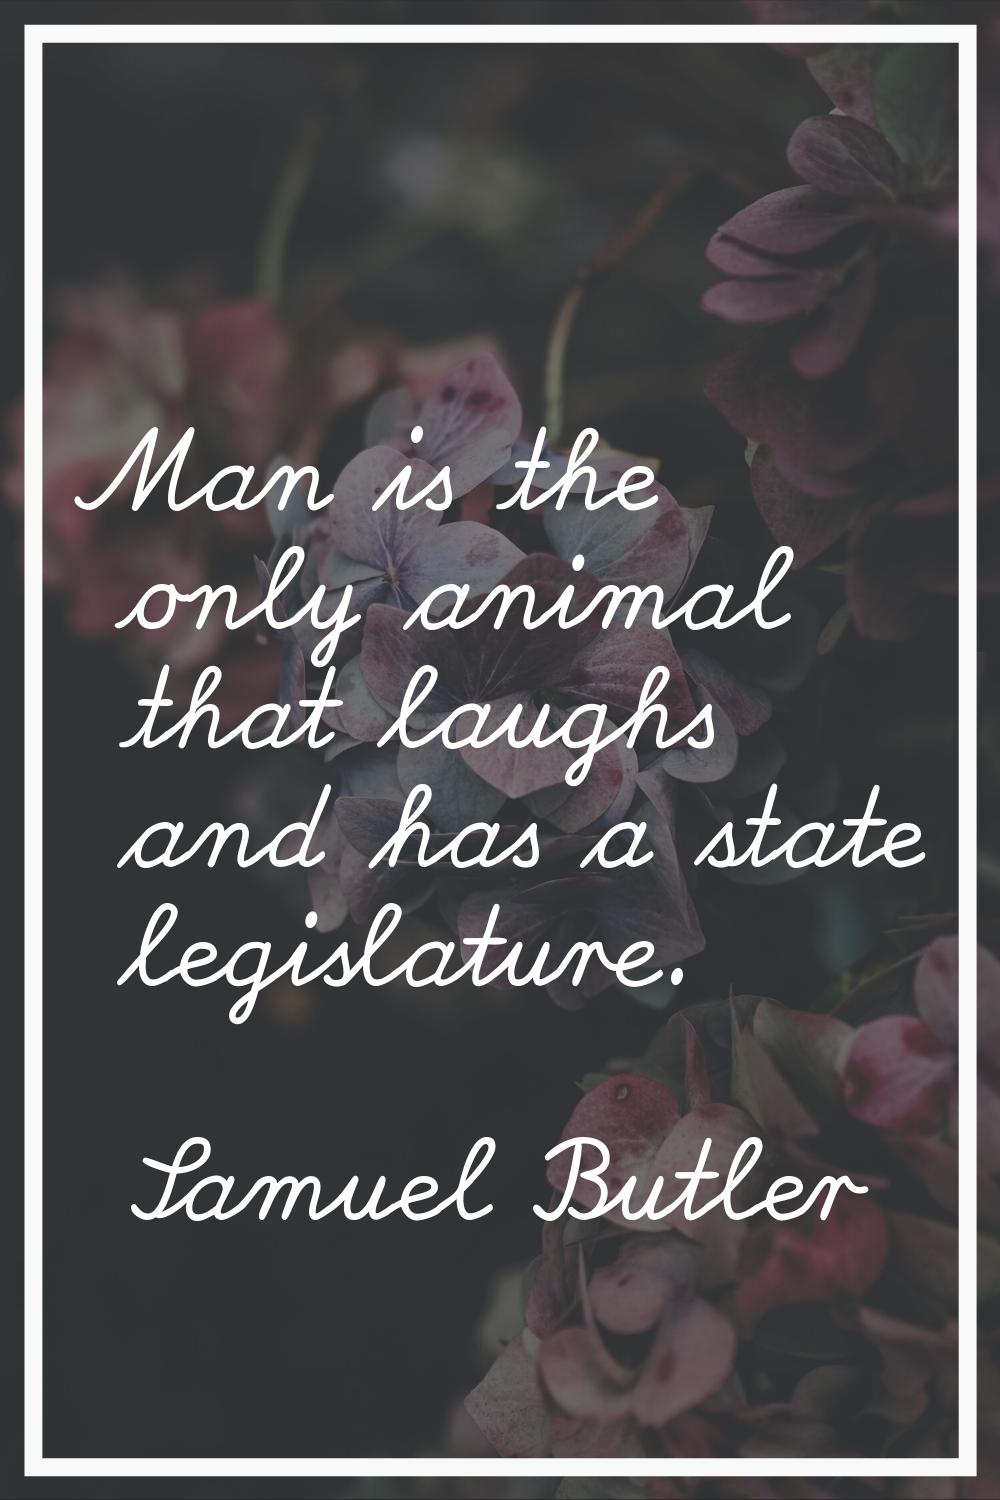 Man is the only animal that laughs and has a state legislature.